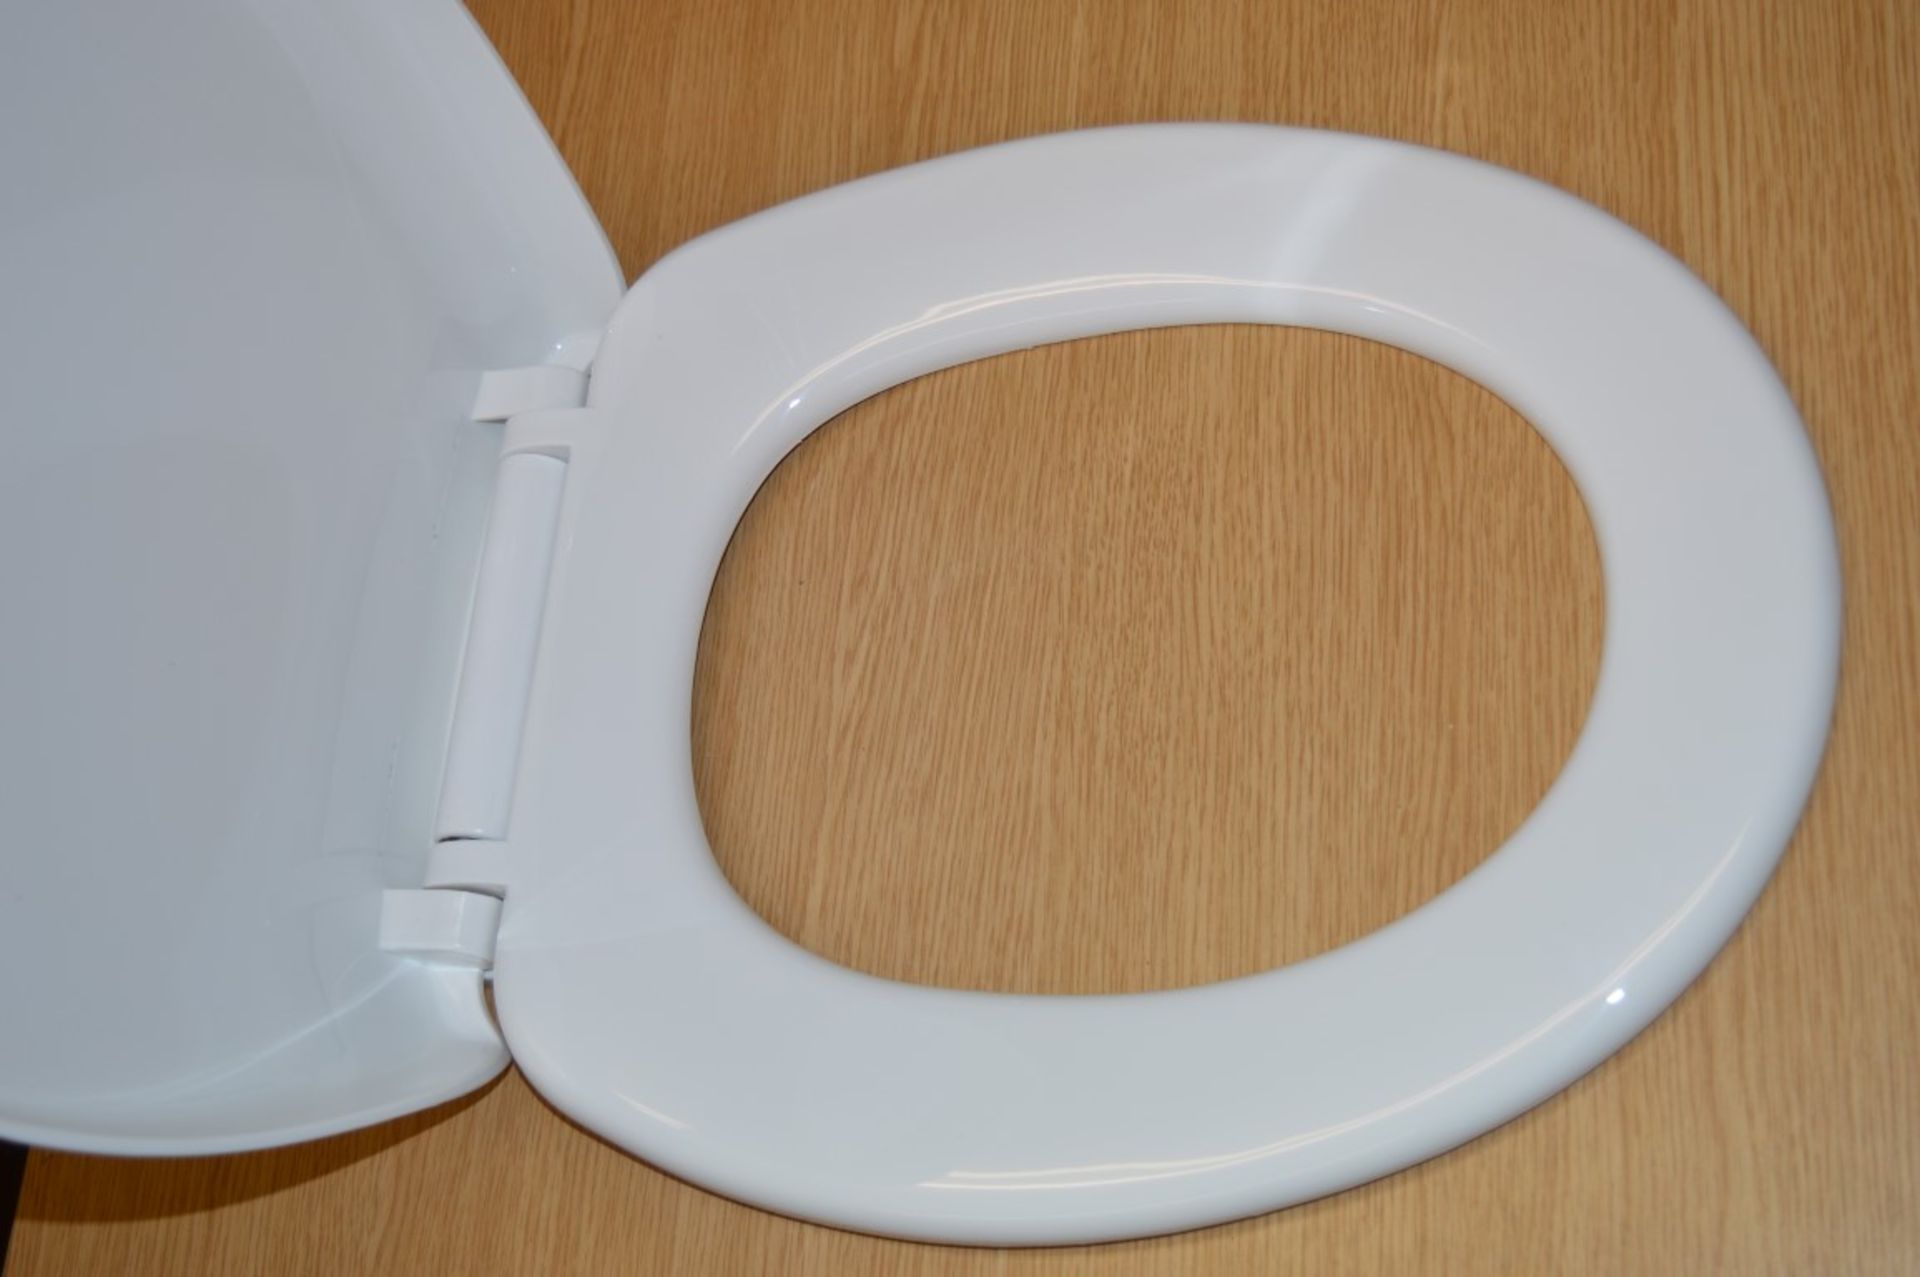 6 x Soft Close COMFORT Toilet Seats - Brand New Boxed Stock - CL034 - Ideal For Resale - Vogue - Image 7 of 7